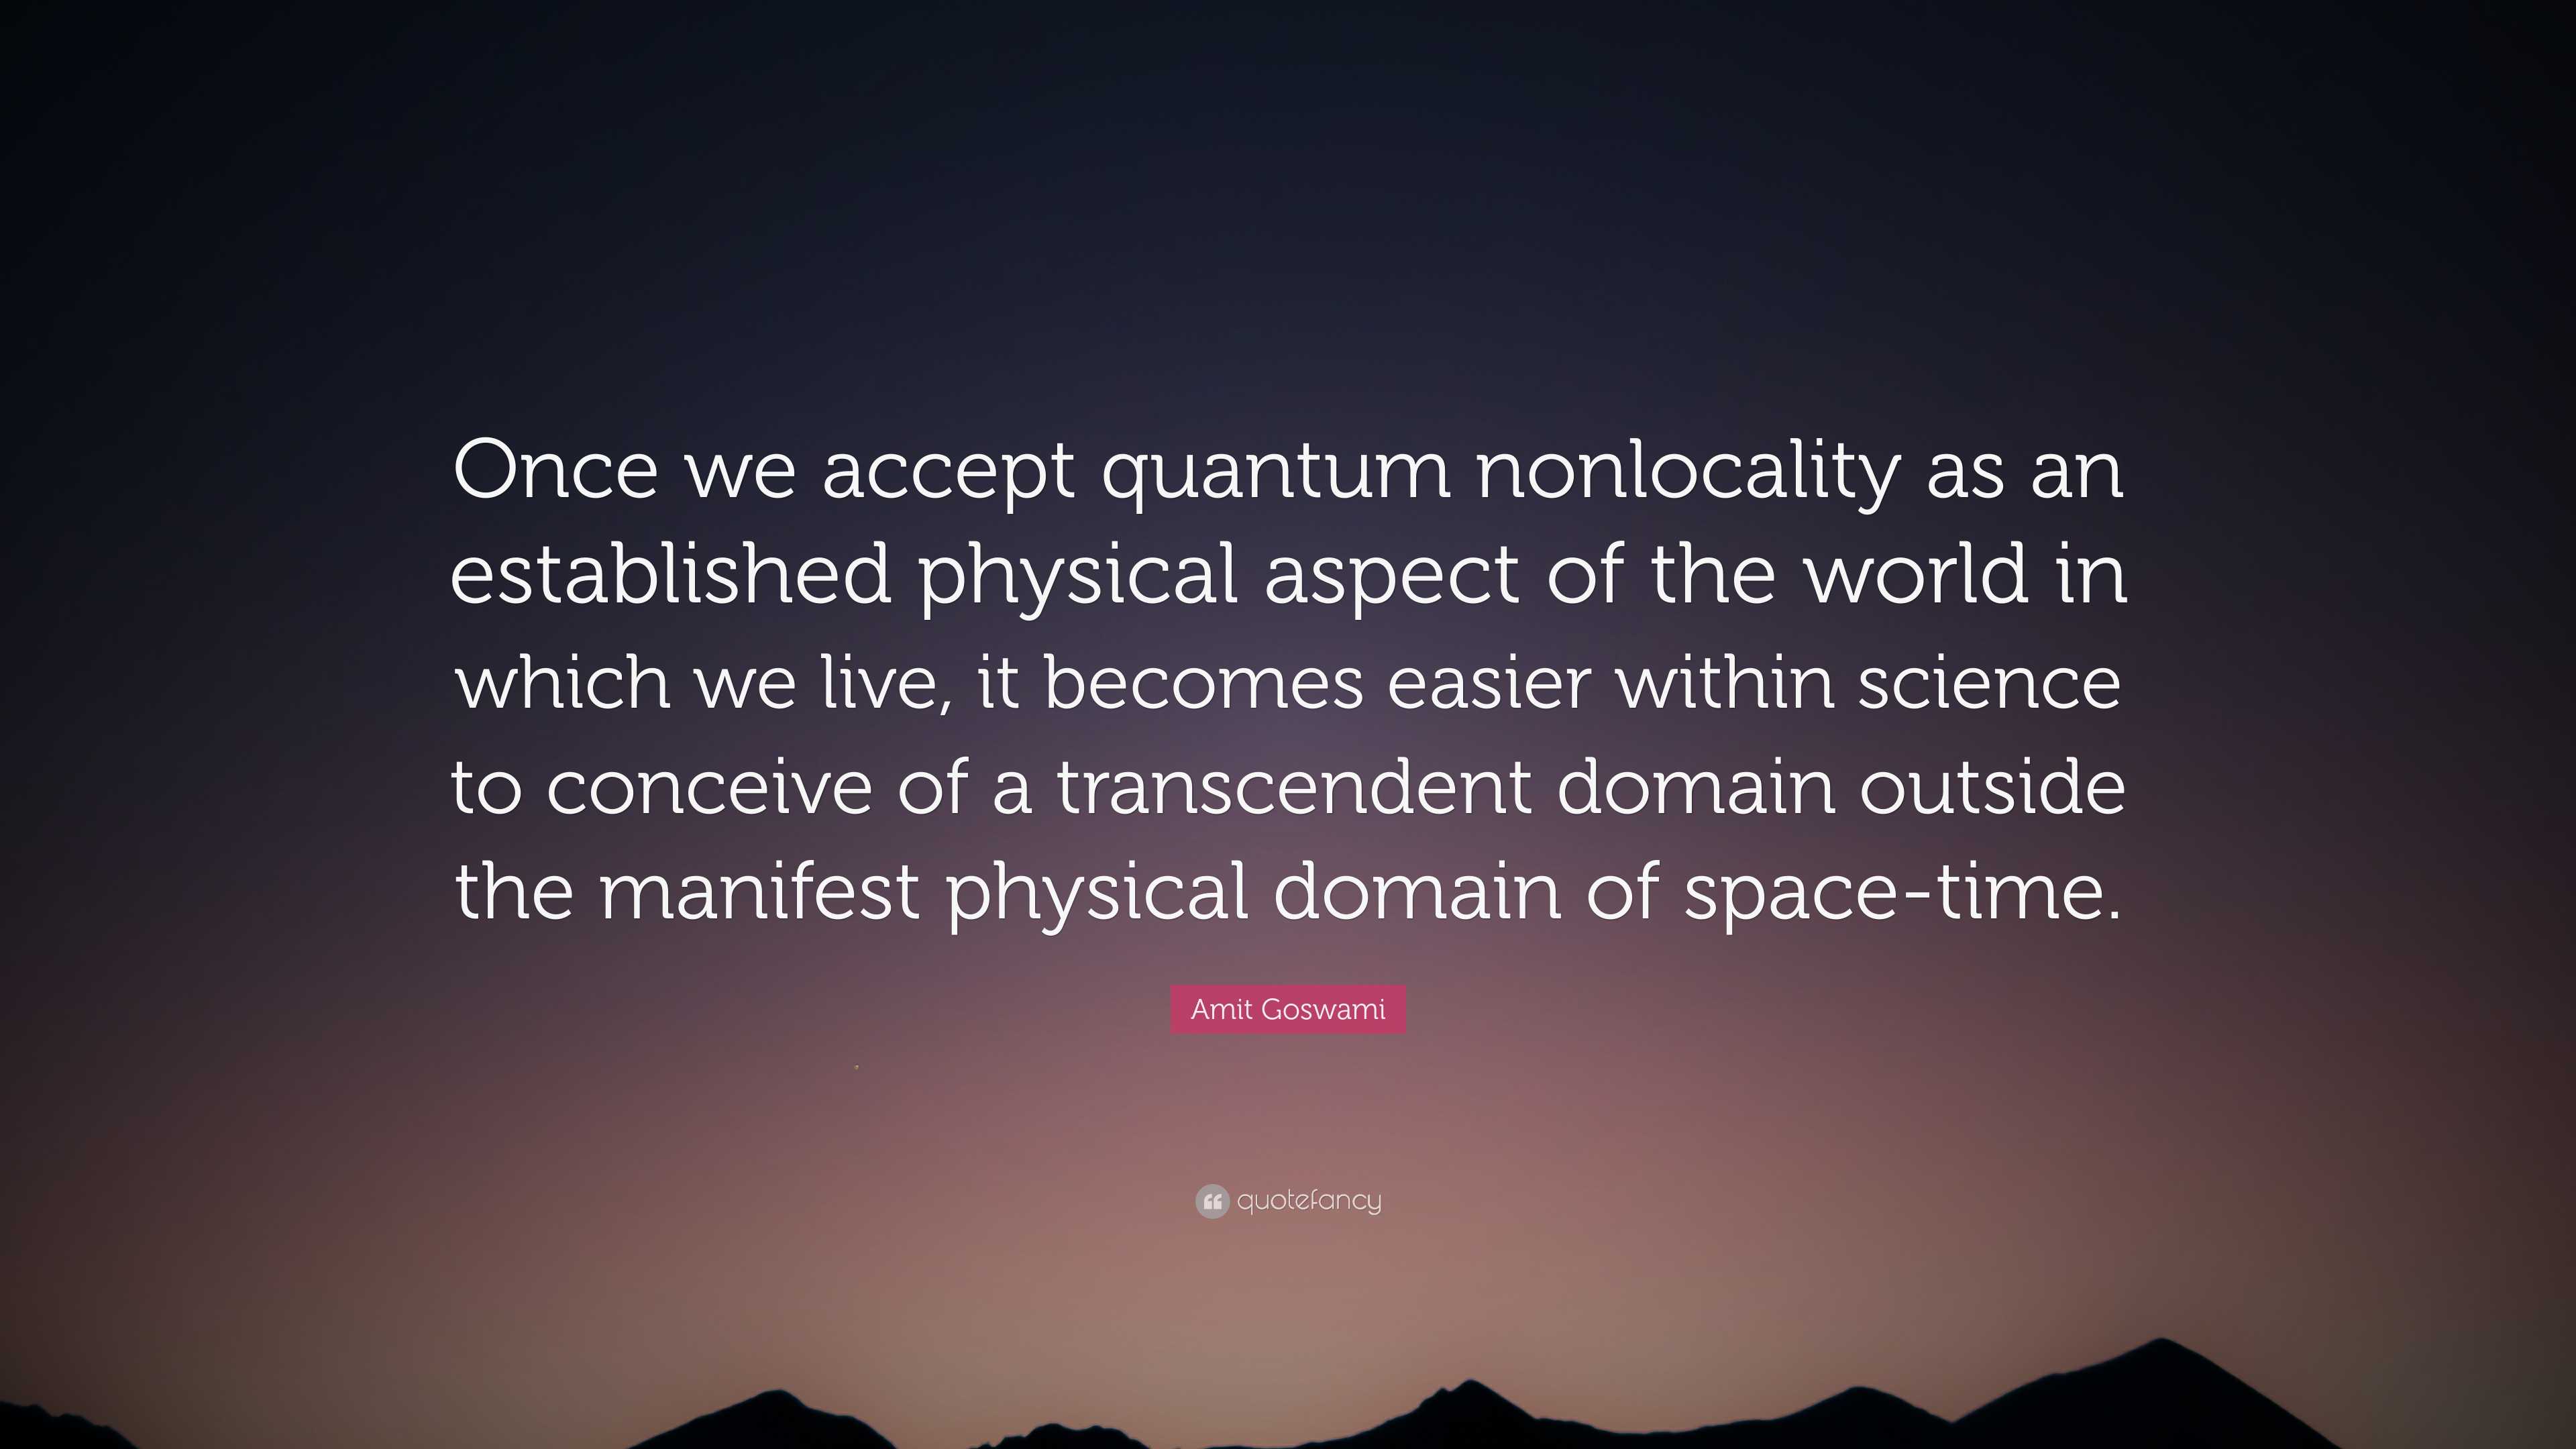 Amit Goswami Quote: “Once we accept quantum nonlocality as an ...